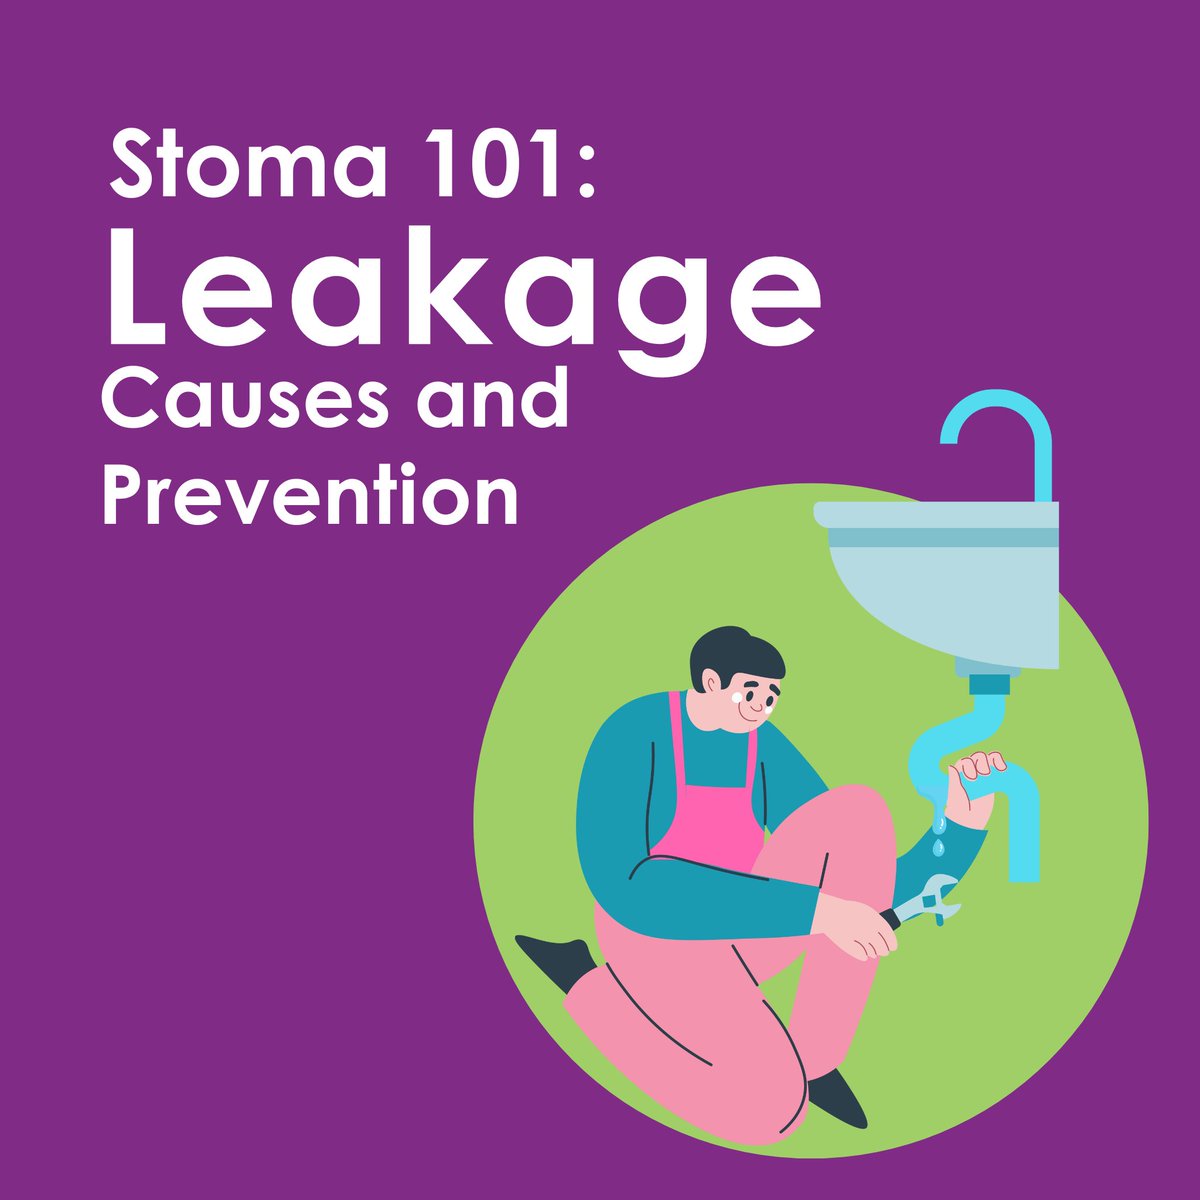 Stoma #leakage is one of the biggest causes of anxiety for anyone living with a #stoma. Our latest issue of Tidings features an article from Stoma Care Nurse Jackie McPhail, discussing leakage, causes and prevention 💜 To find out more, head to colostomyuk.org/information/st…